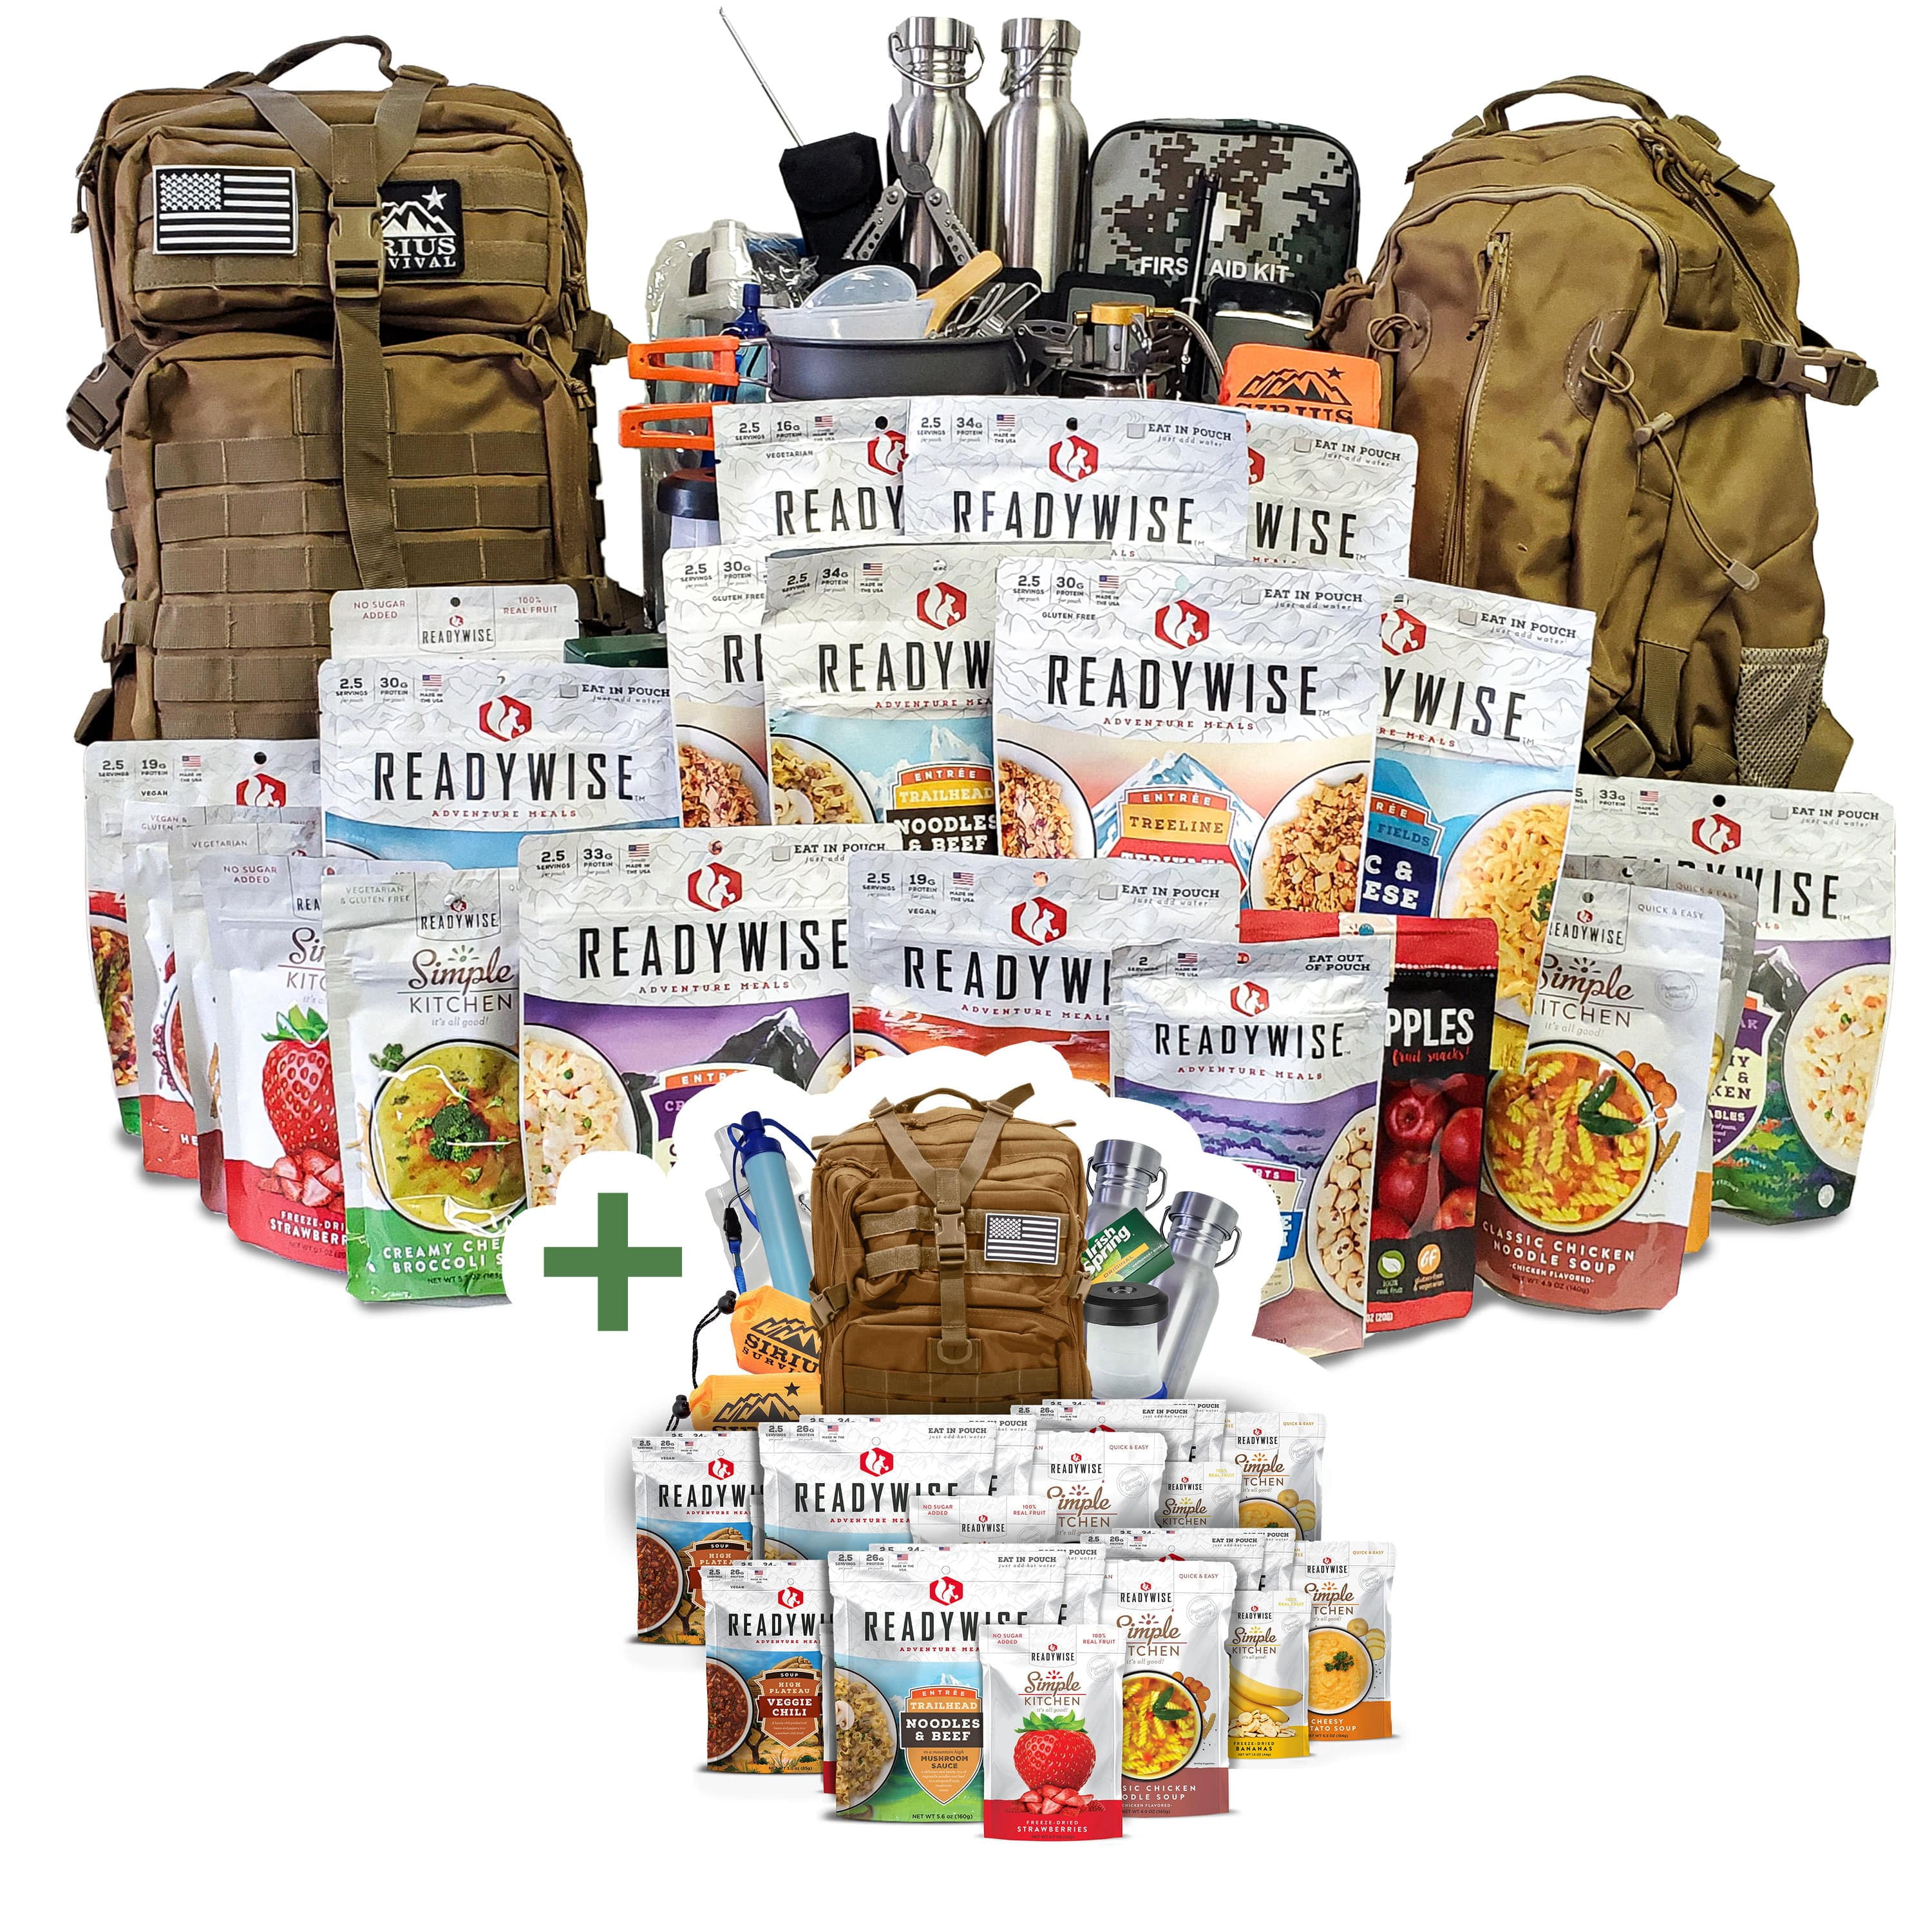 Family Comfort 72 Emergency Survival Kit/Backpack – 72 Hour for 4 People –  Disaster Preparedness – Delicious ReadyWise Food, Gear, Lighting, First